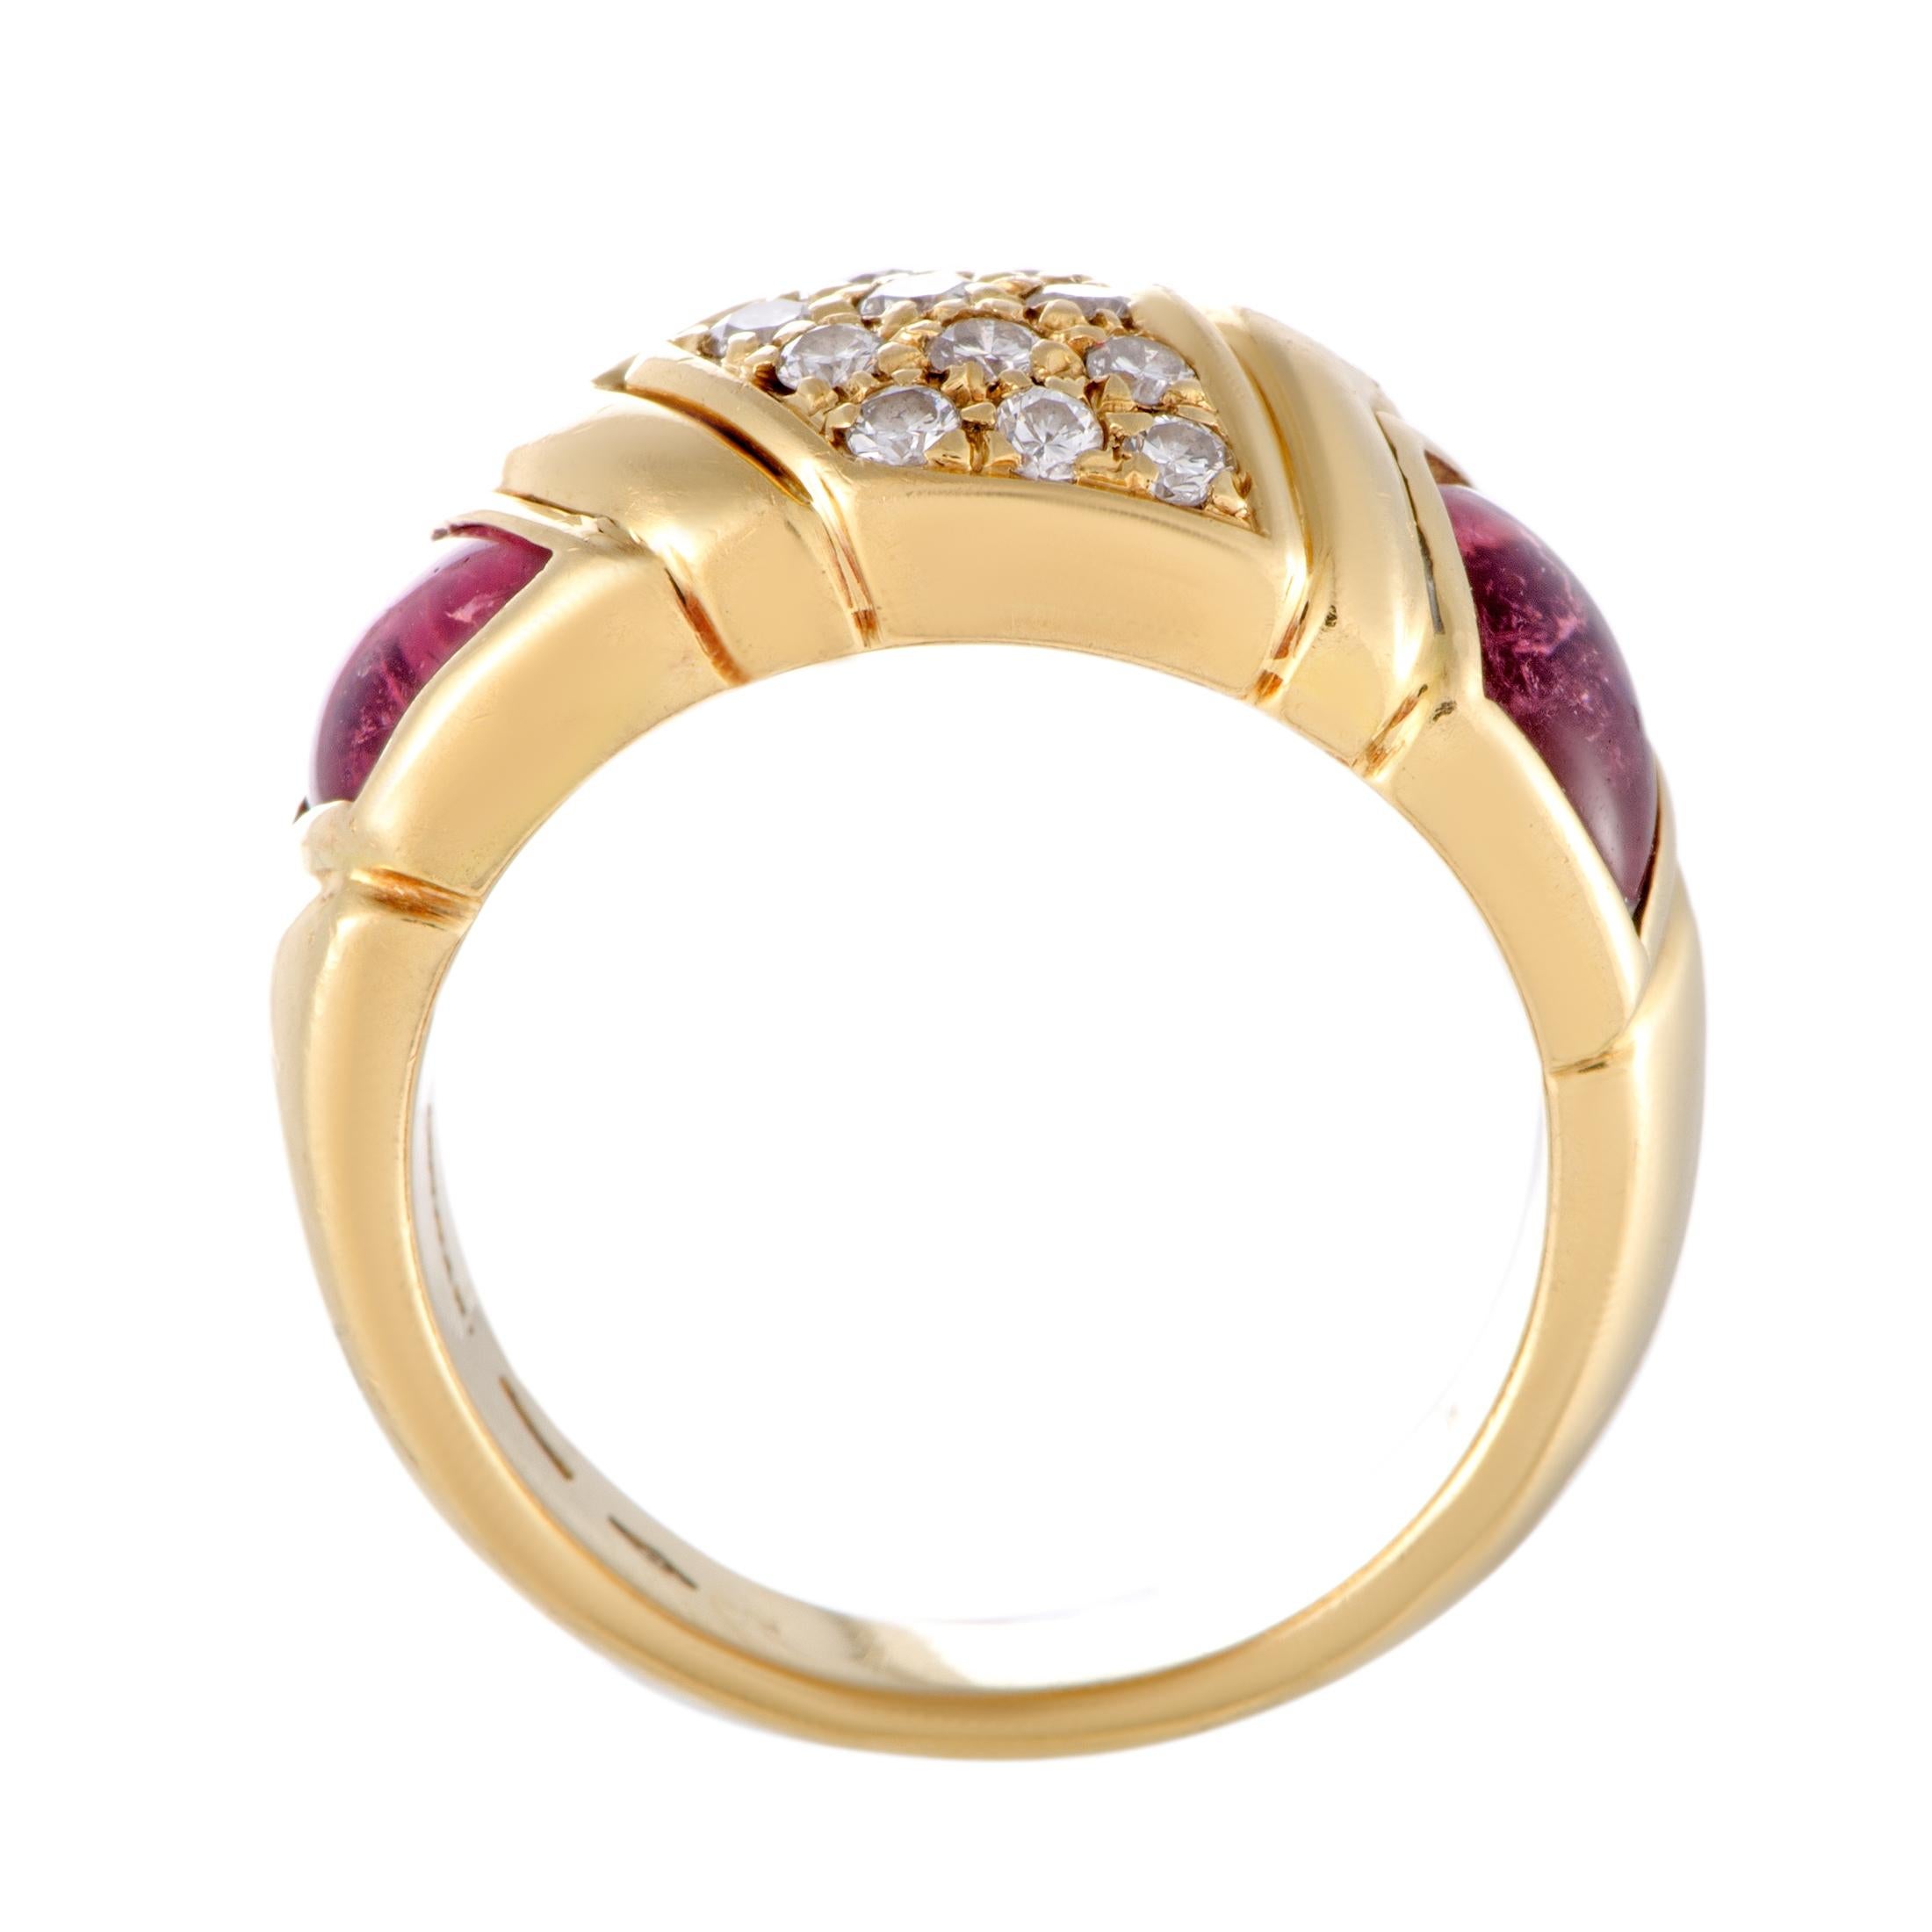 Add a splendidly feminine touch to your looks with this wonderful jewelry piece from Bvlgari that is beautifully crafted from radiant 18K yellow gold and attractively embellished with eye-catching gems. The ring is set with two gorgeous pink